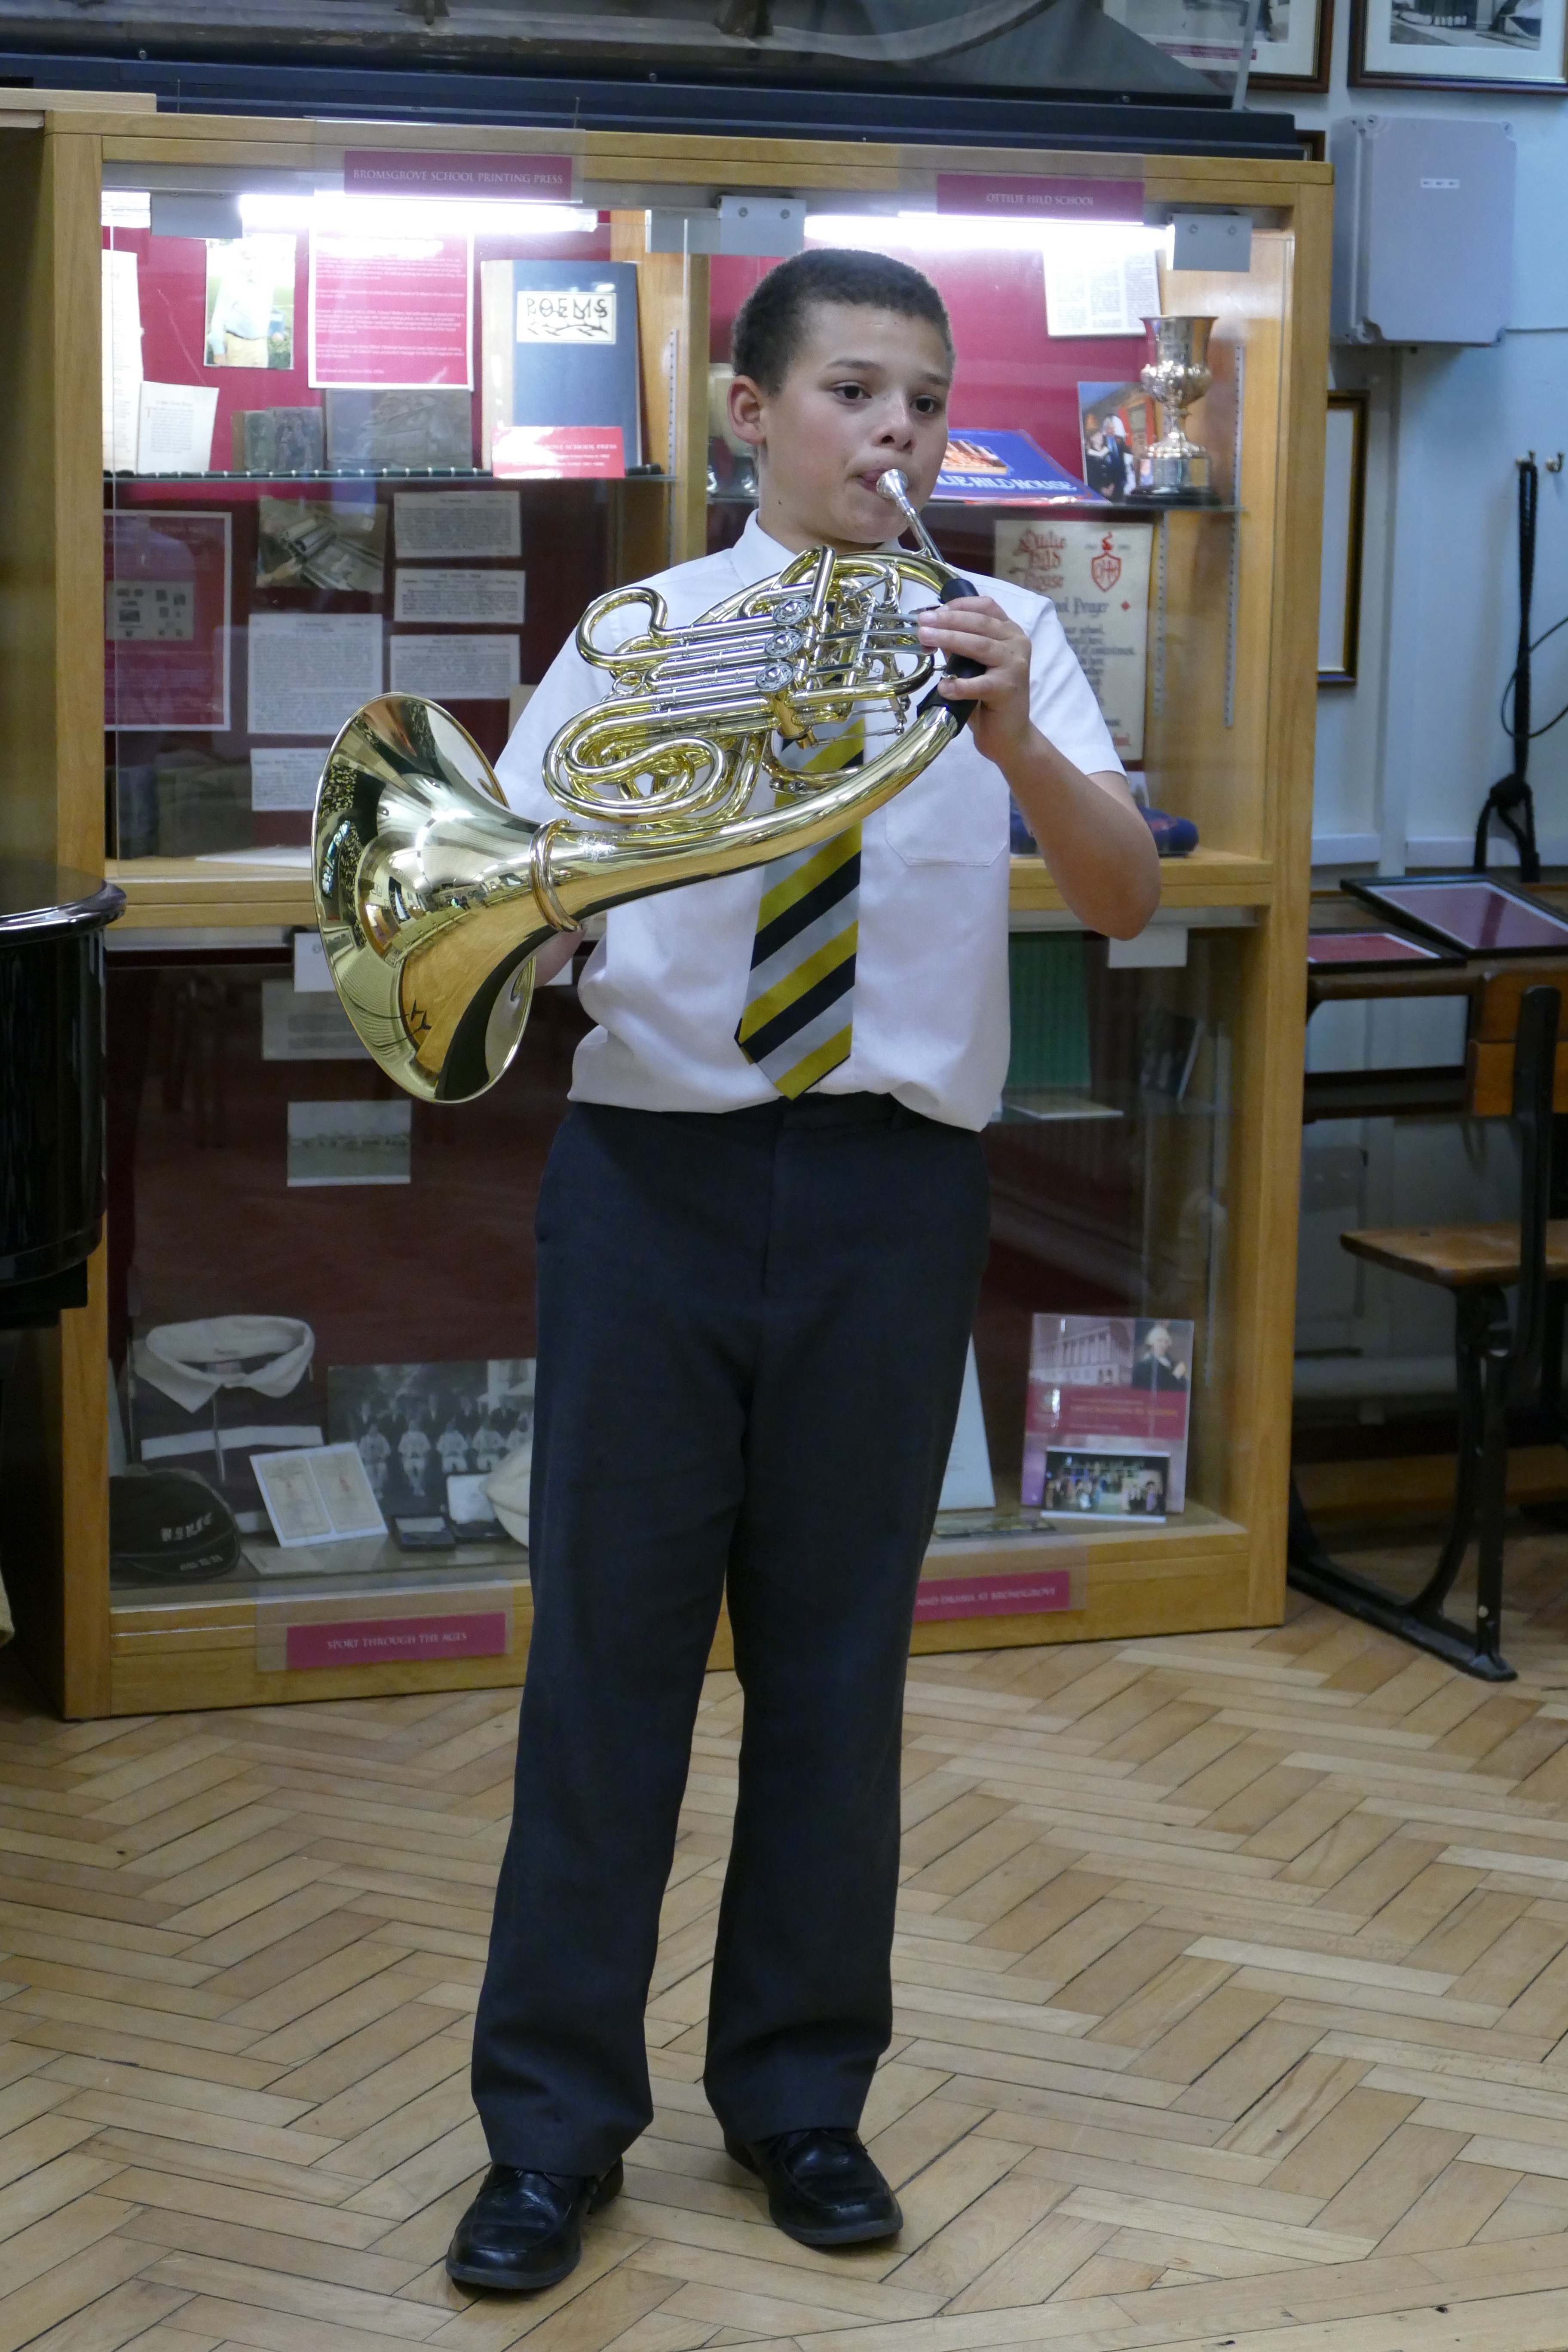 24th May 2016, Informal Concert in the Old Chapel: Jude W on French Horn